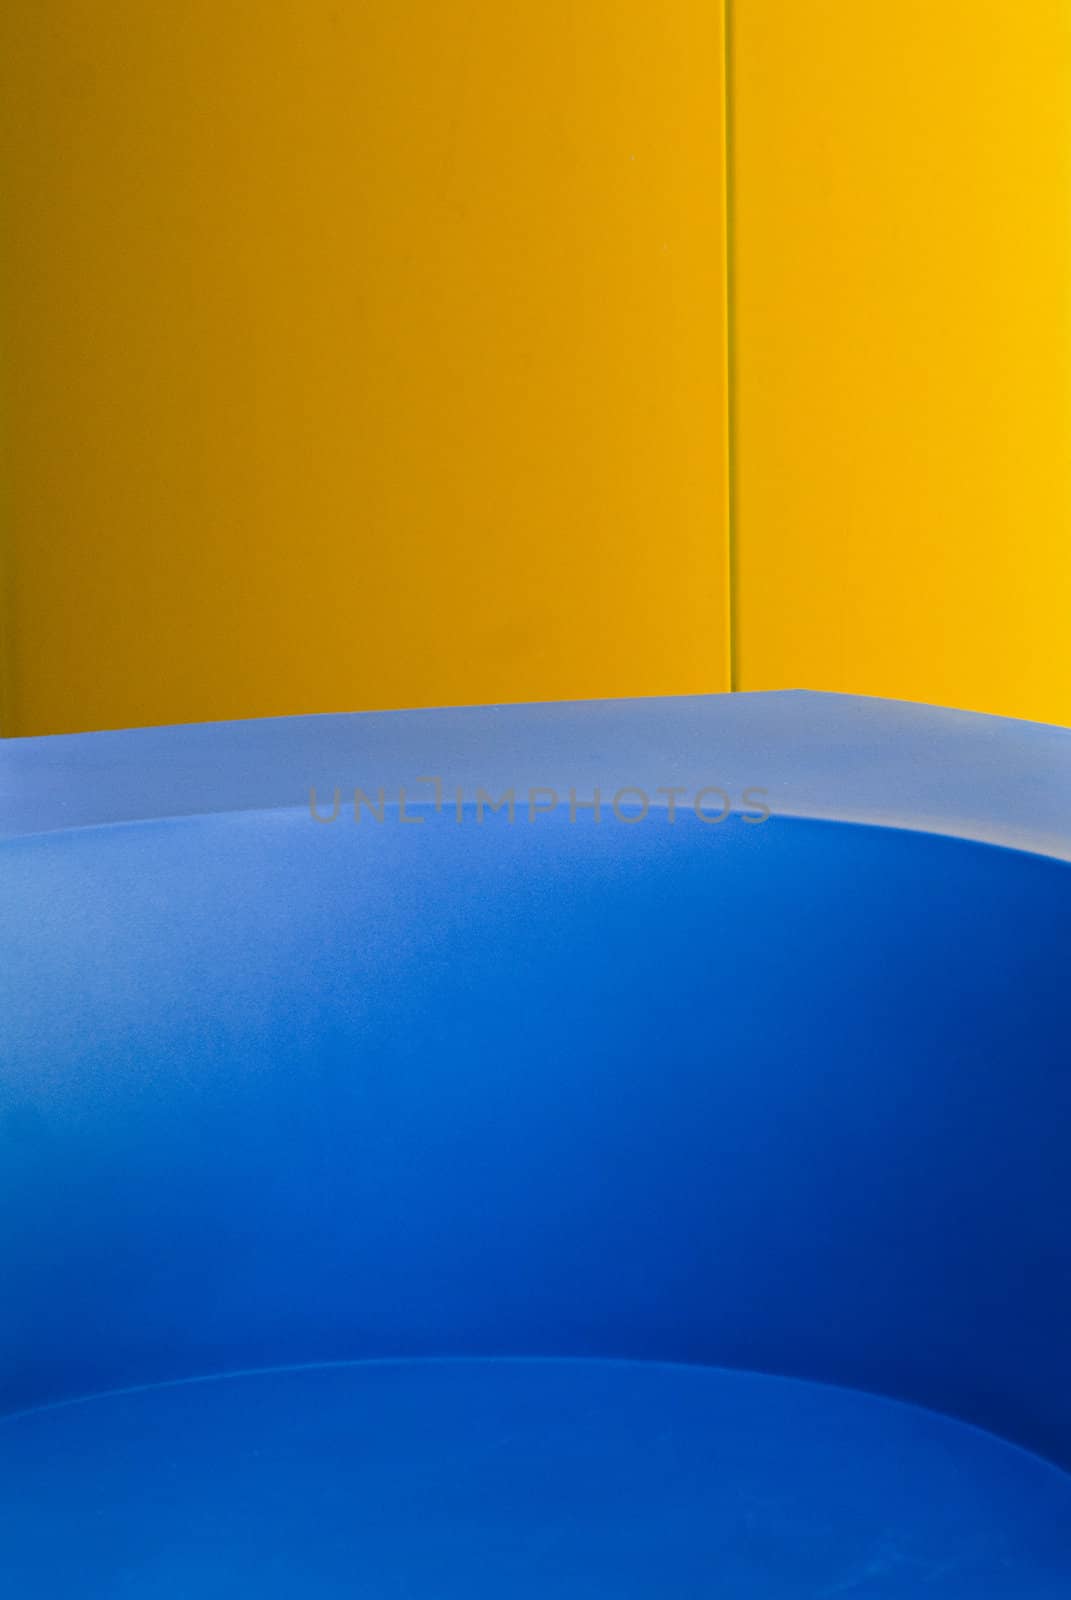 Blue concrete chair in front of yellow pillar